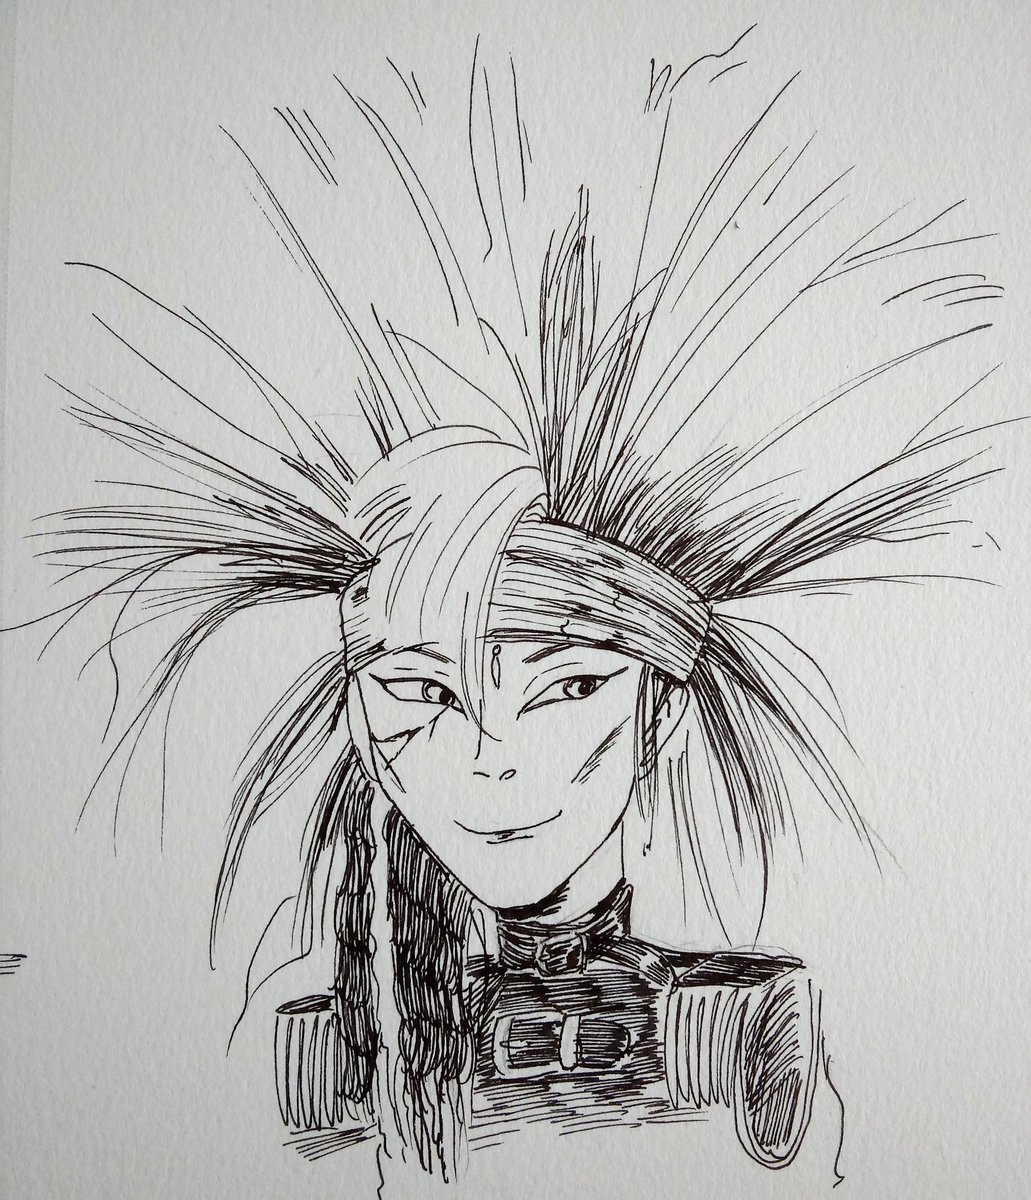 A black pen drawing on white paper. Hide of X Japan. His hair is fanned out above his head. He's wearing a head band, a bindi, has cracks painted across his face, and is wearing a leather shirt with tassels on the shoulders.